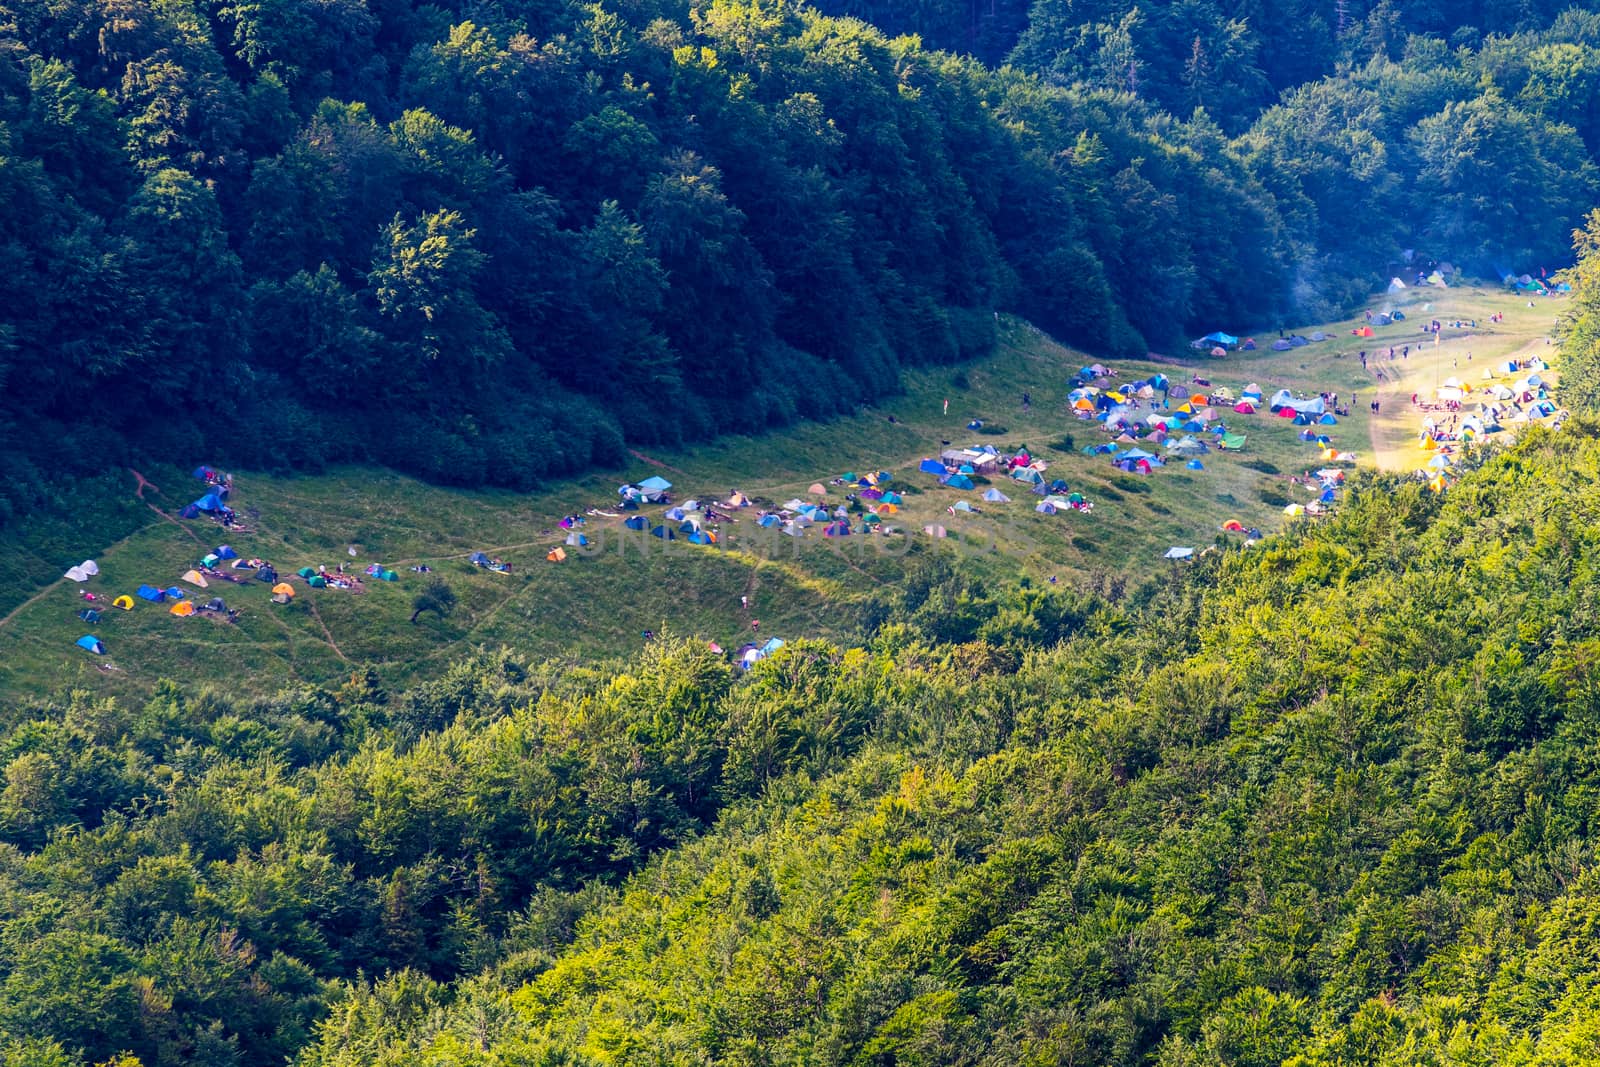 Multicolored spots on the green grass in the valley between the slopes of the overgrown trees is a tent camp located there. by Adamchuk